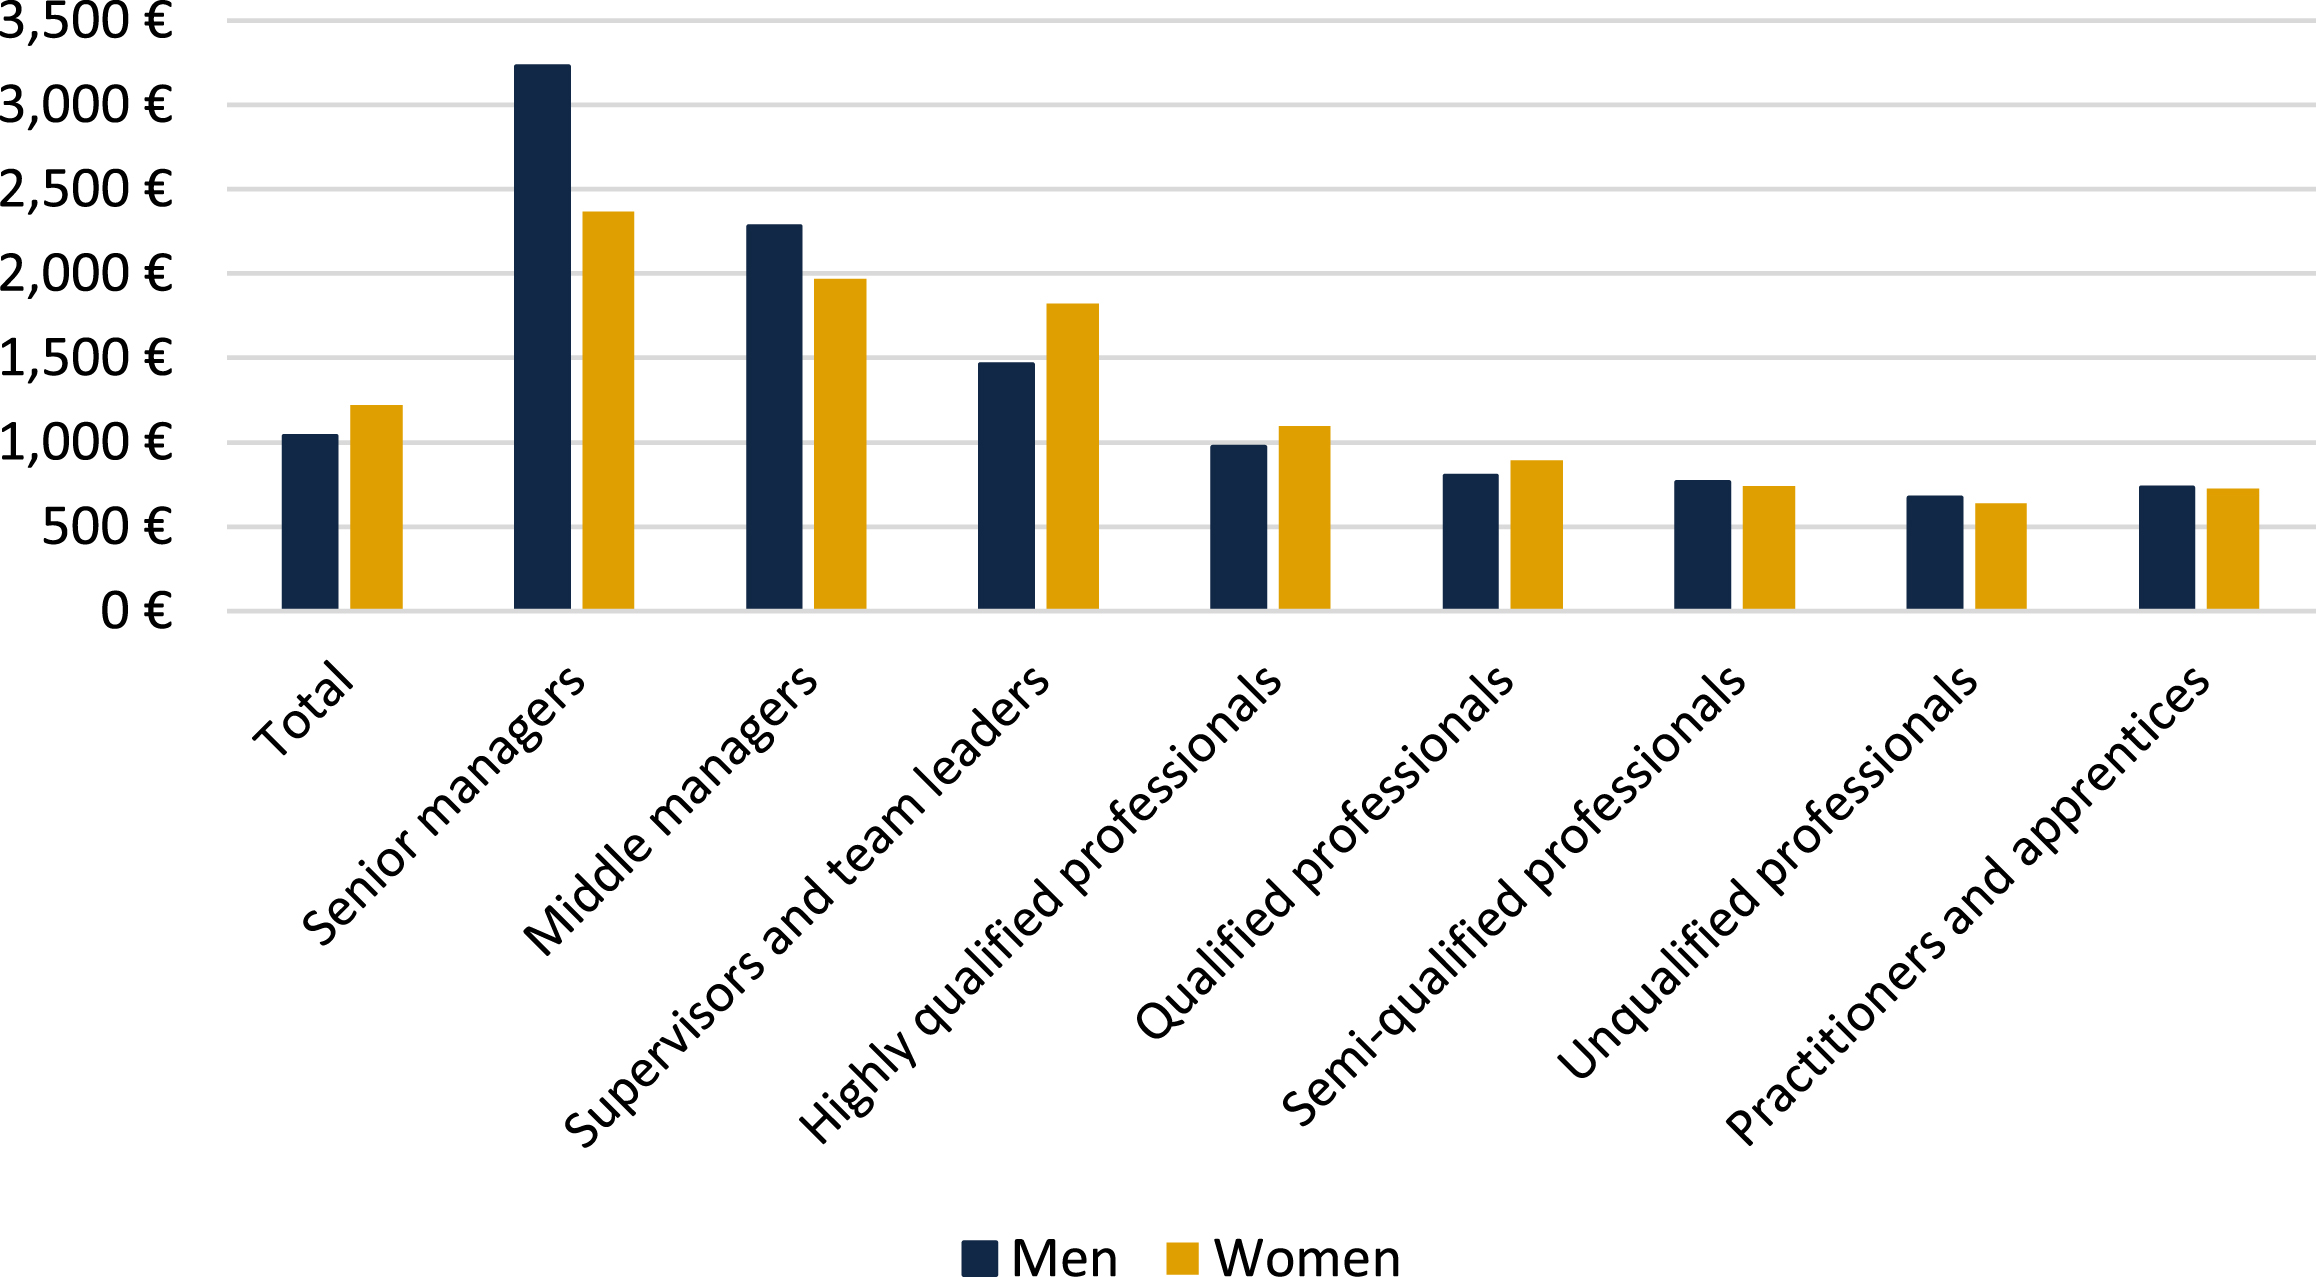 Gender pay gap in the Portuguese transport and storage sector by professional categories in 2019. Data source: PORDATA, 2020.